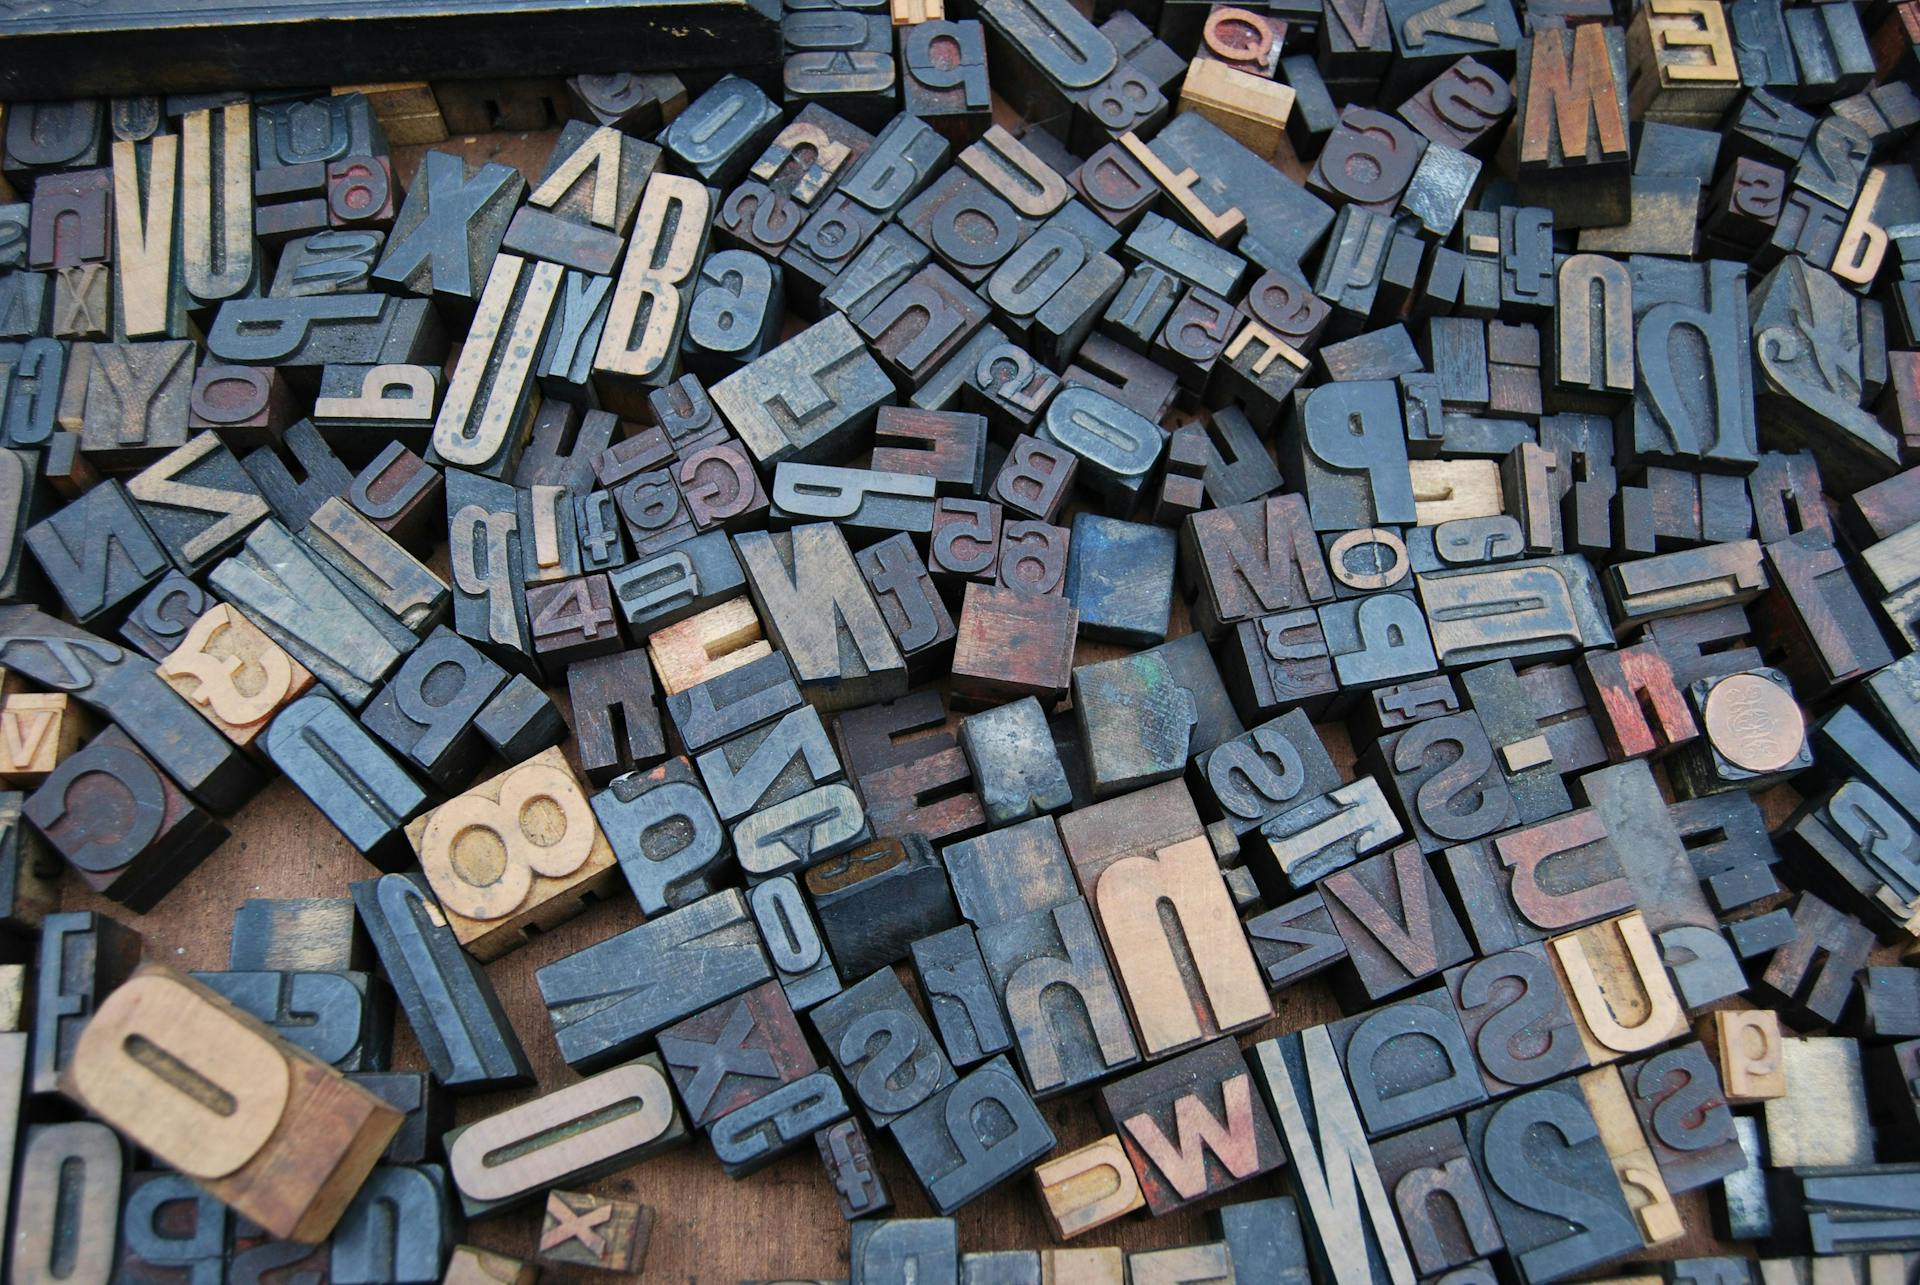 Jumble of letter and number stamps in a pile. Proper spelling and grammar is important for social media posting